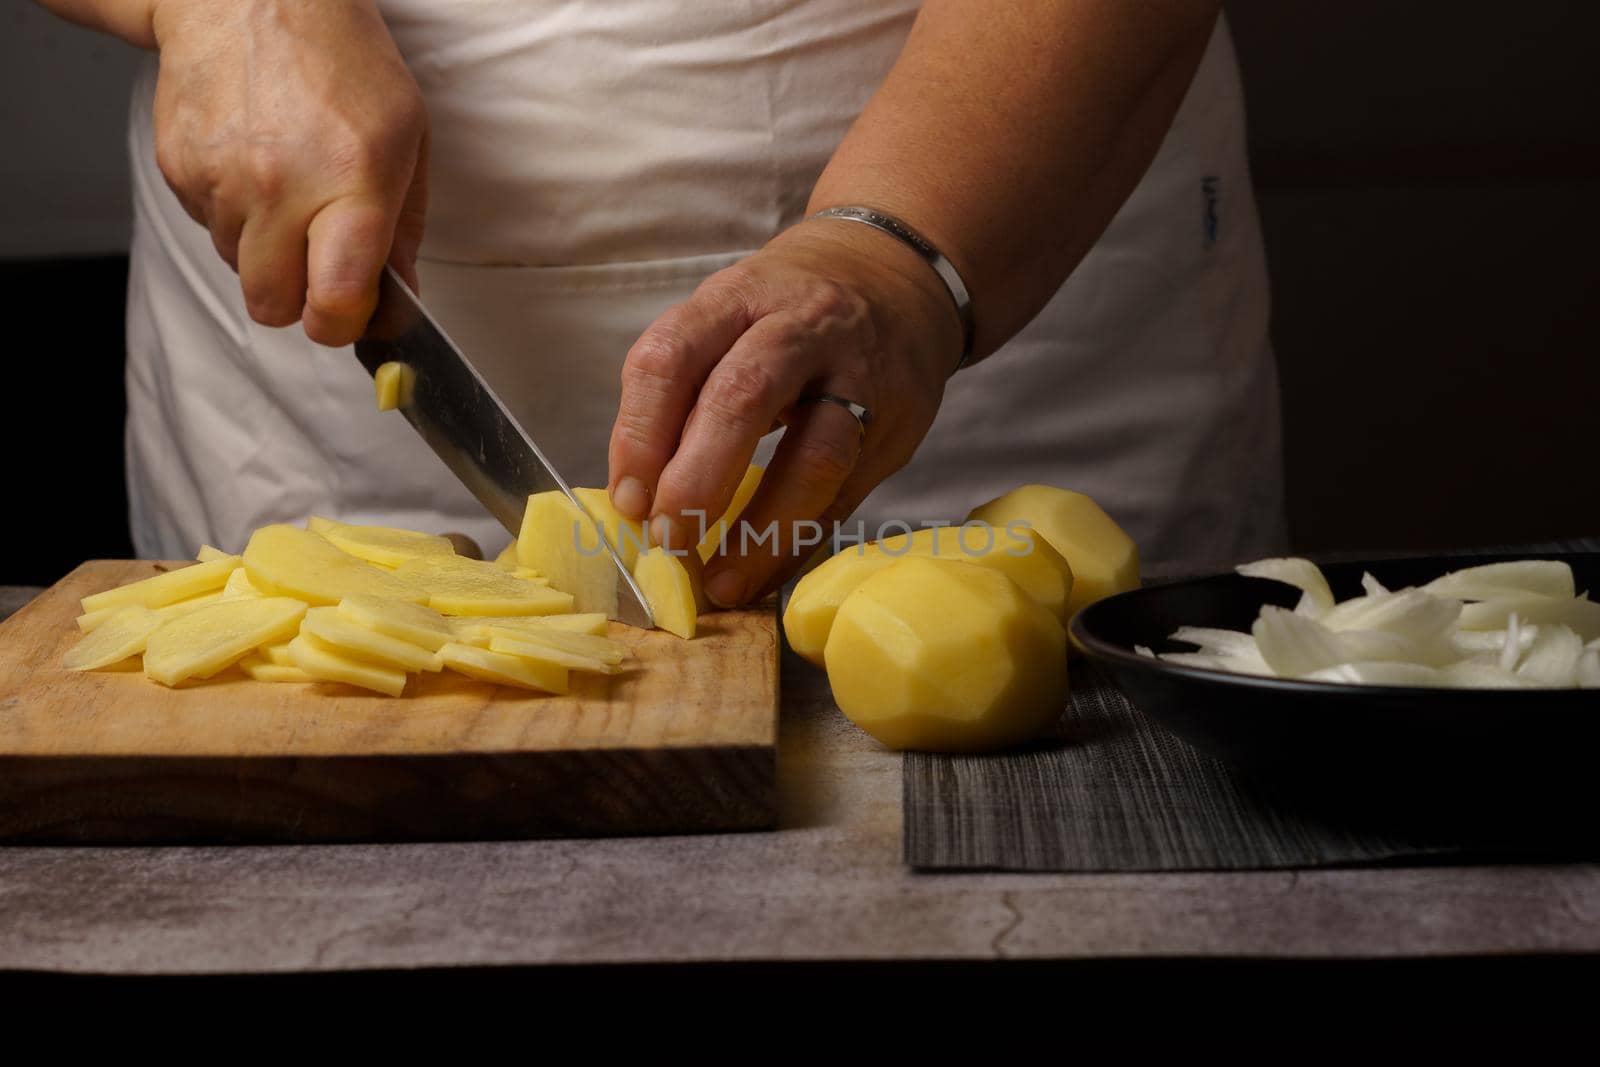 woman slicing potatoes with a knife on a wooden board next to a black plate with sliced onion